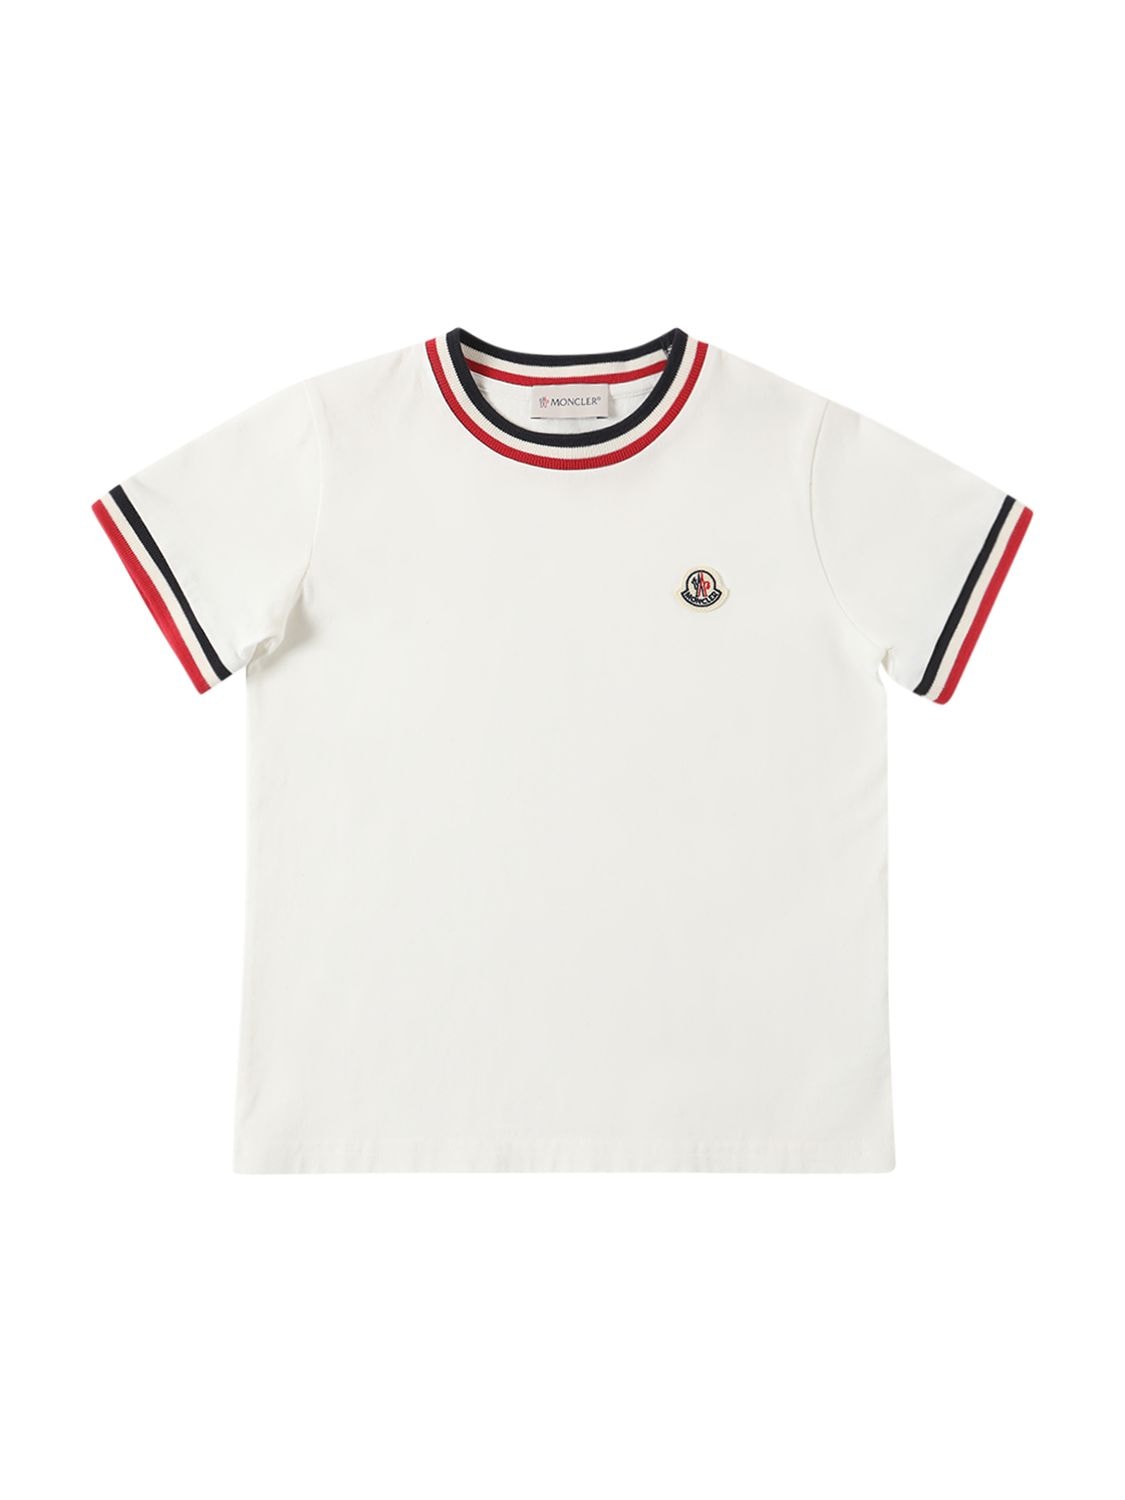 Moncler Kids' Cotton Jersey Tricolor T-shirt In White